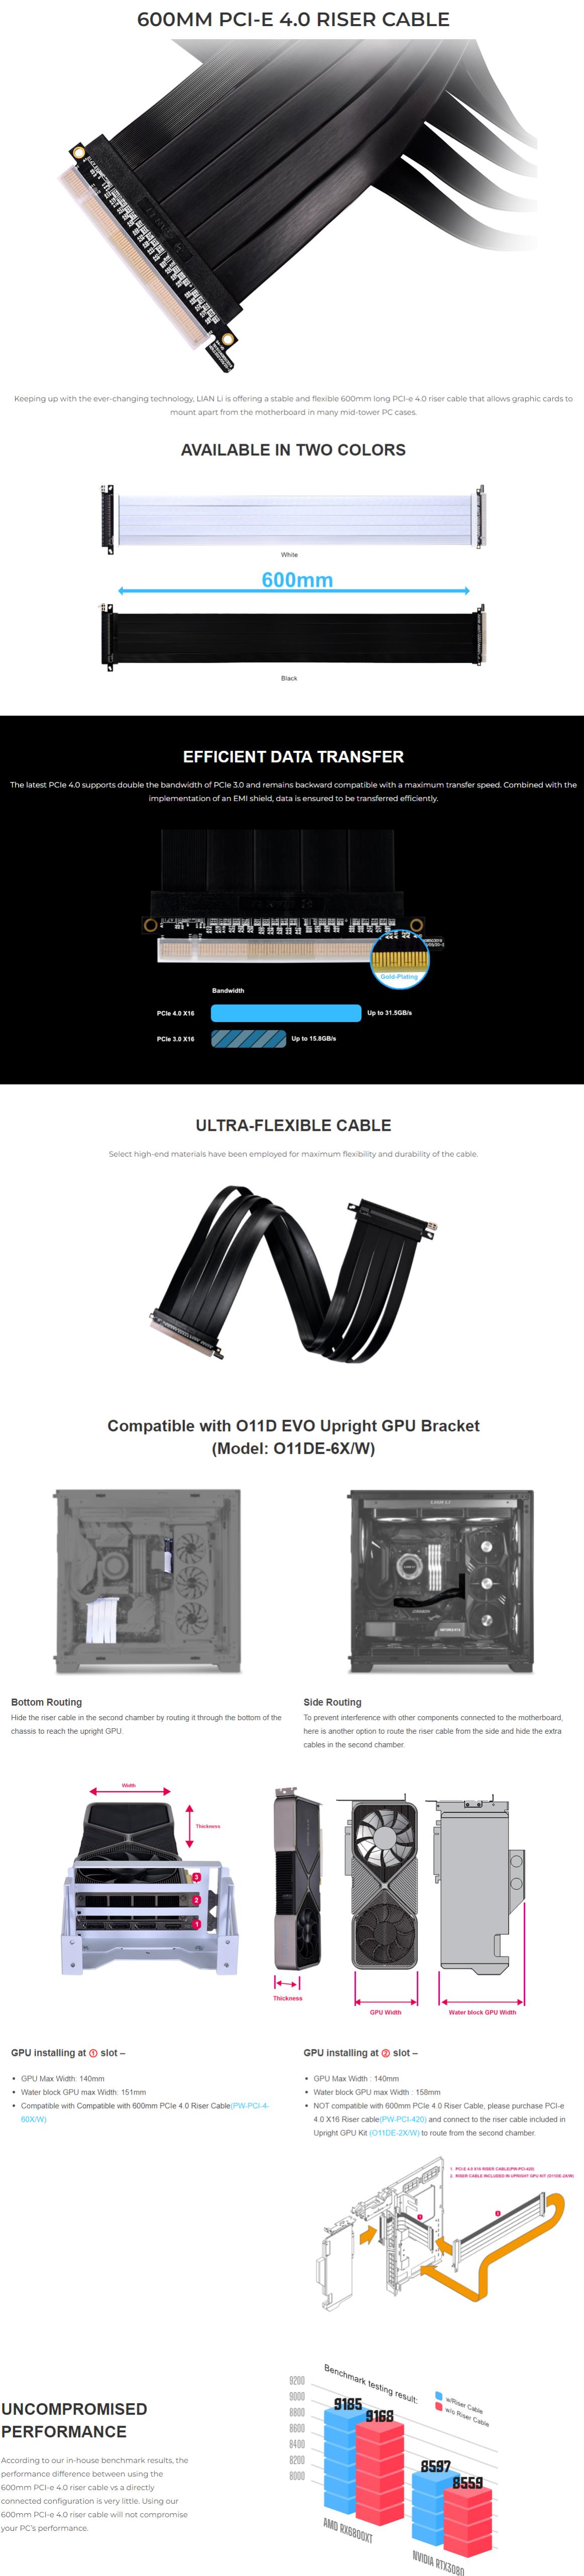 A large marketing image providing additional information about the product Lian Li PCIe 4.0 Riser Cable 600mm - Black - Additional alt info not provided